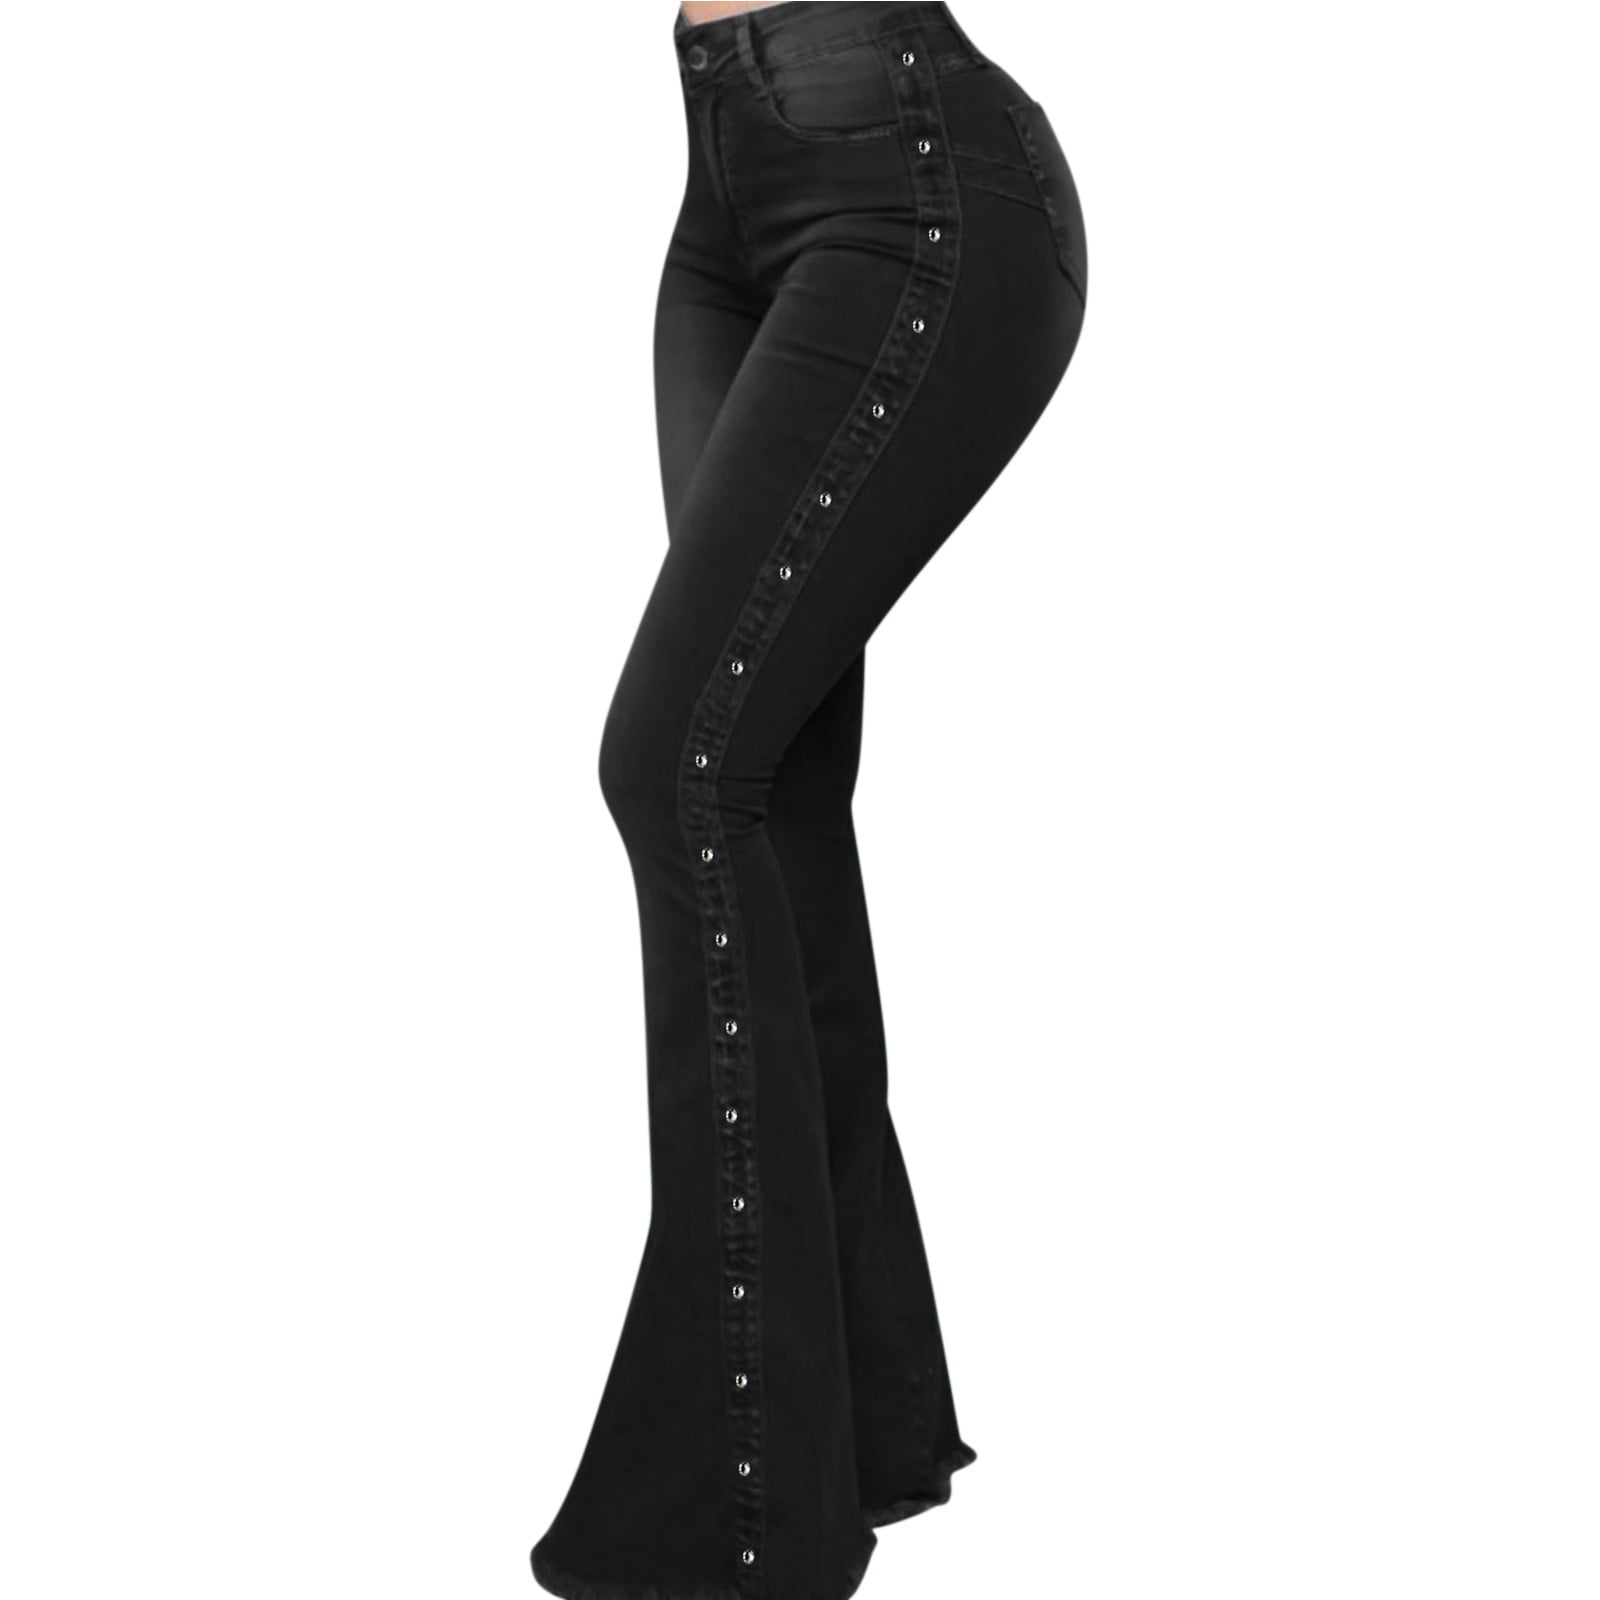 FAST TRAIN Flared Women Black Jeans - Buy FAST TRAIN Flared Women Black  Jeans Online at Best Prices in India